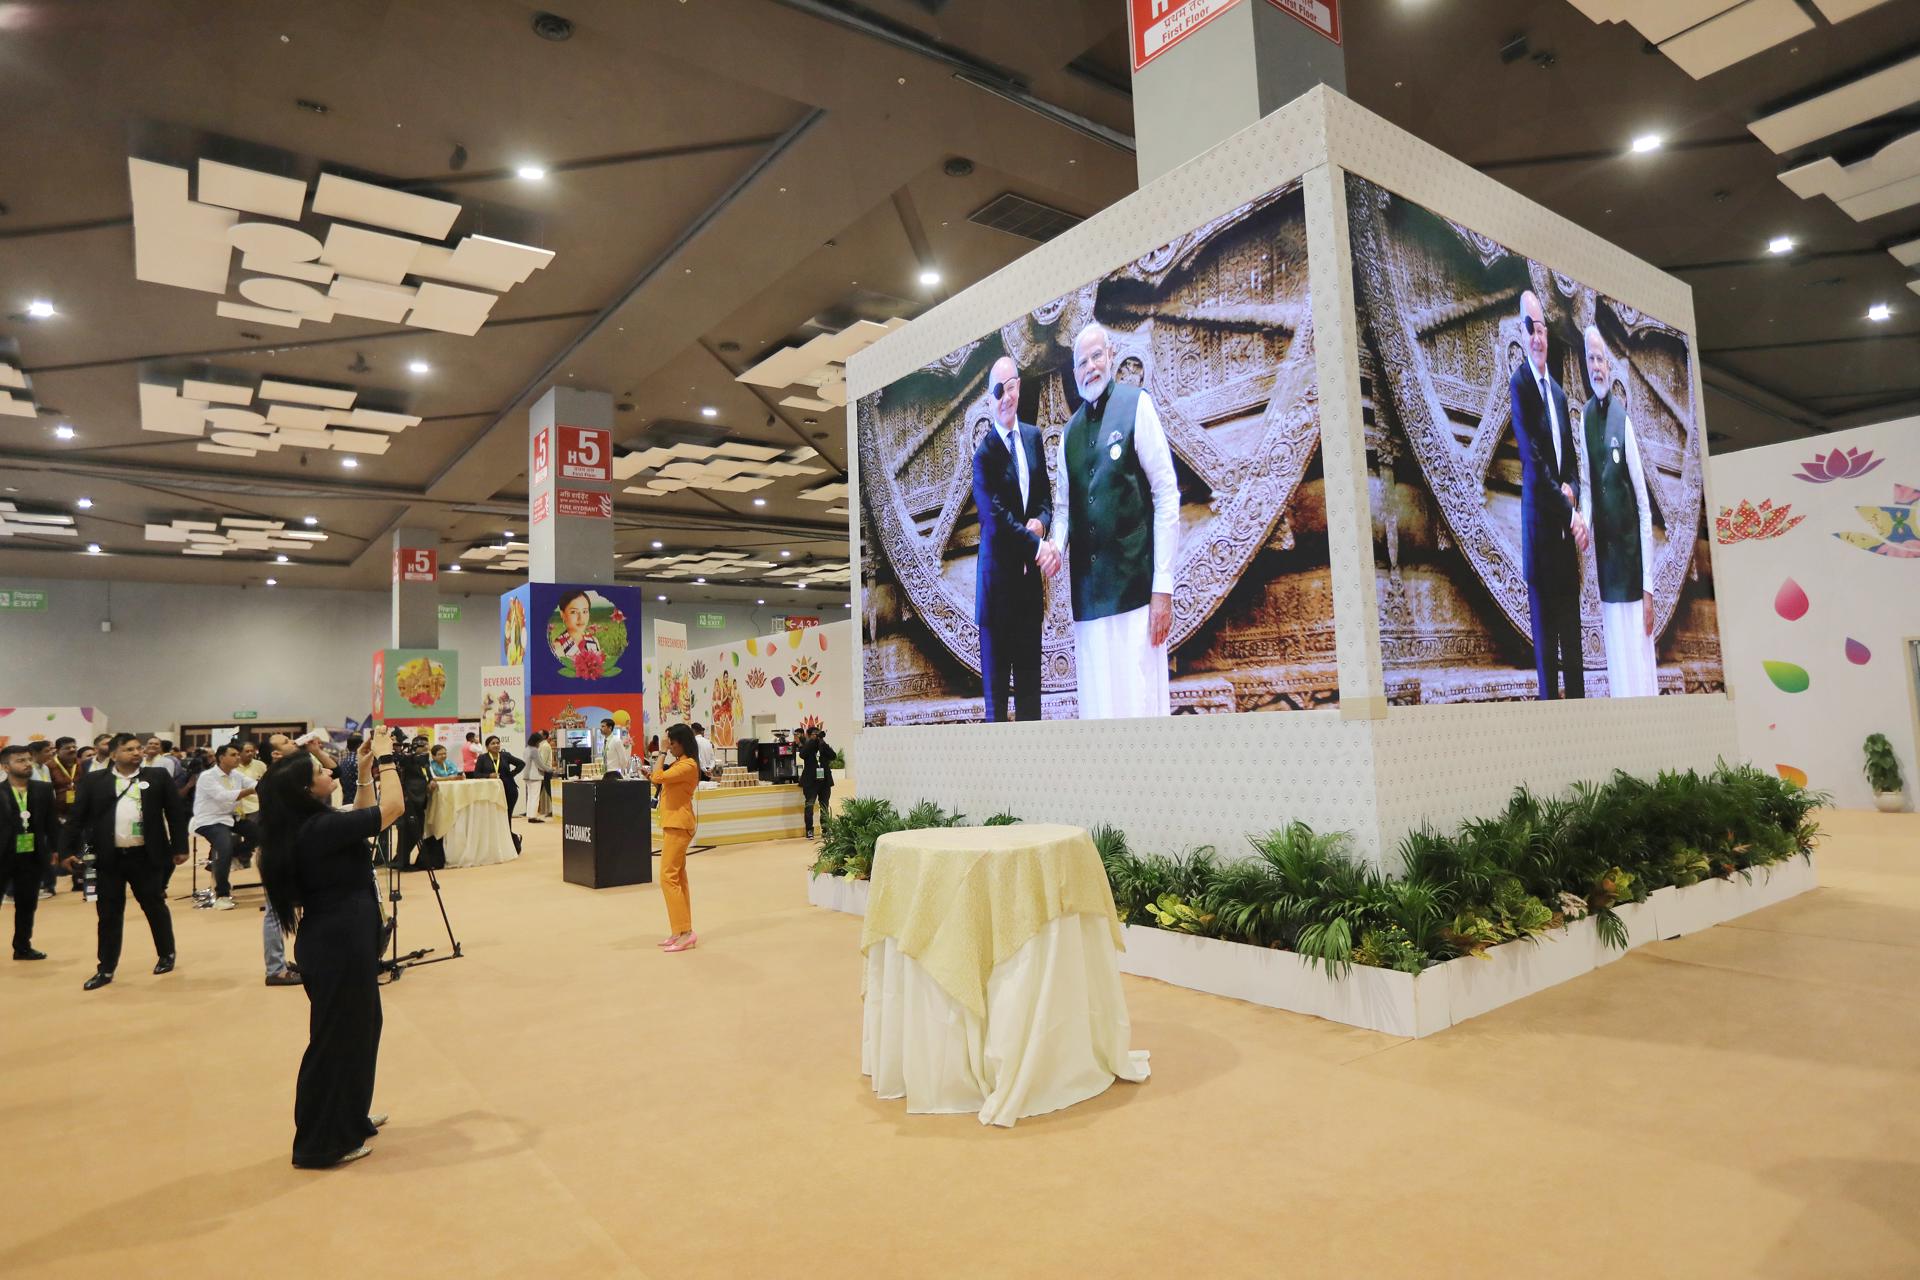 A giant screen installed at the International media center shows the German Chancellor Olaf Scholz welcomed by the Indian prime minister Narendra Modi at Bharat Mandapam at ITPO Convention Centre, Pragati Maidan, the venue of the G20 Summit in New Delhi, India, 09 September 2023. EFE-EPA/HARISH TYAGI
